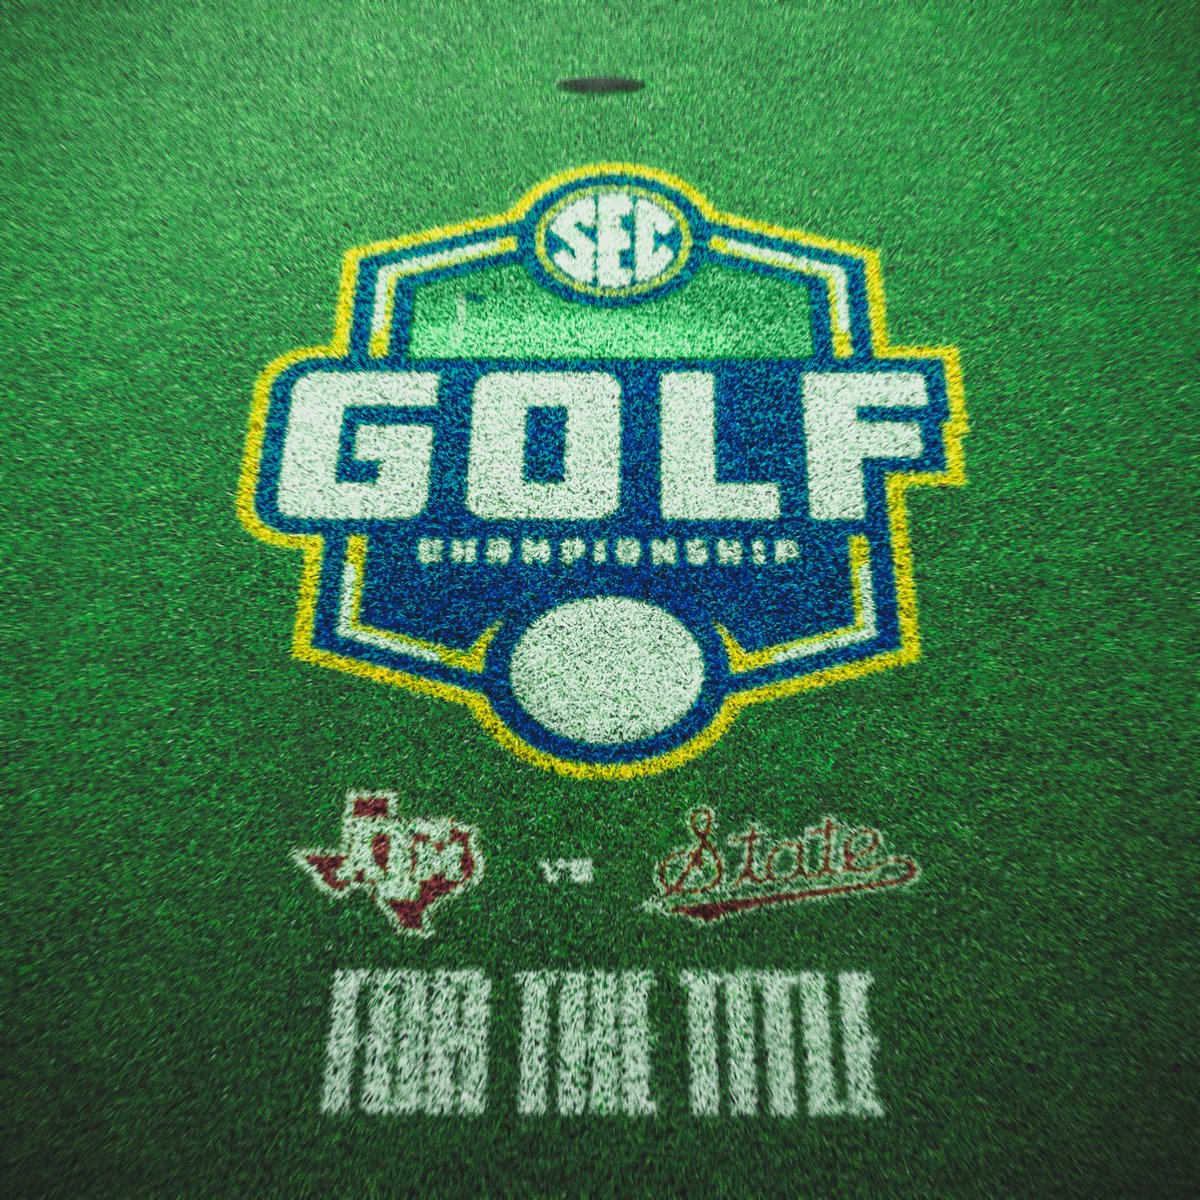 Tomorrow morning...
A rematch for the title. 😤

No. 3 @aggiewomensgolf vs. No. 4 @HailStateWG 
📺 @SECNetwork

#SECGolf x #SECChampionship